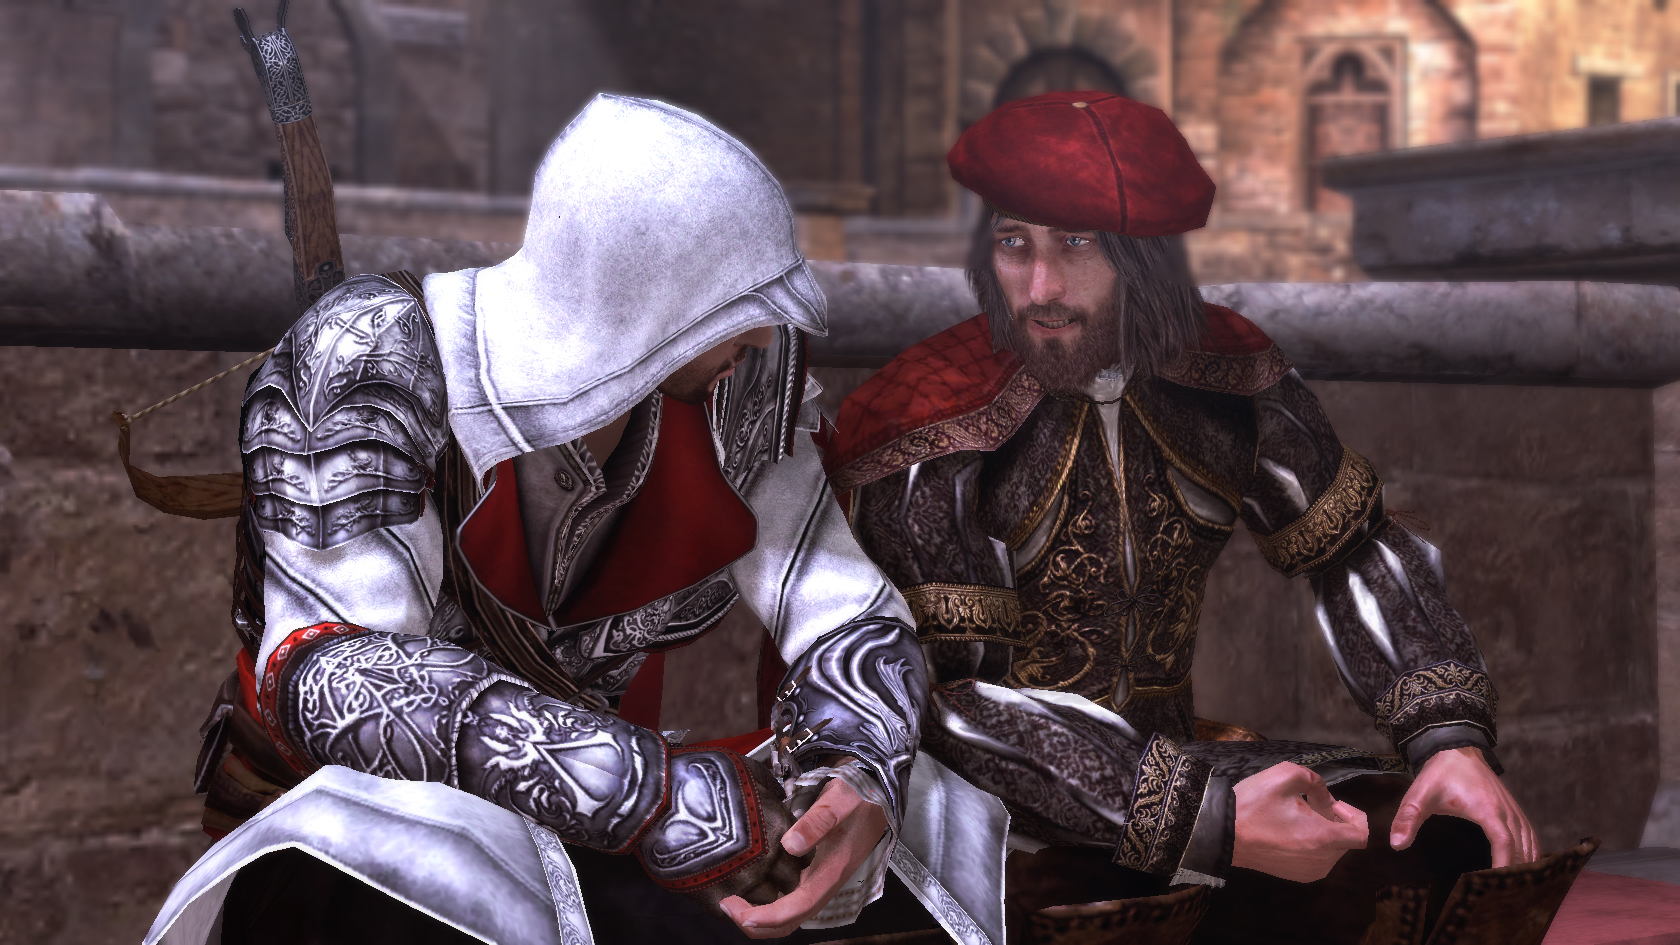 Assassin's Creed 2 System Requirements